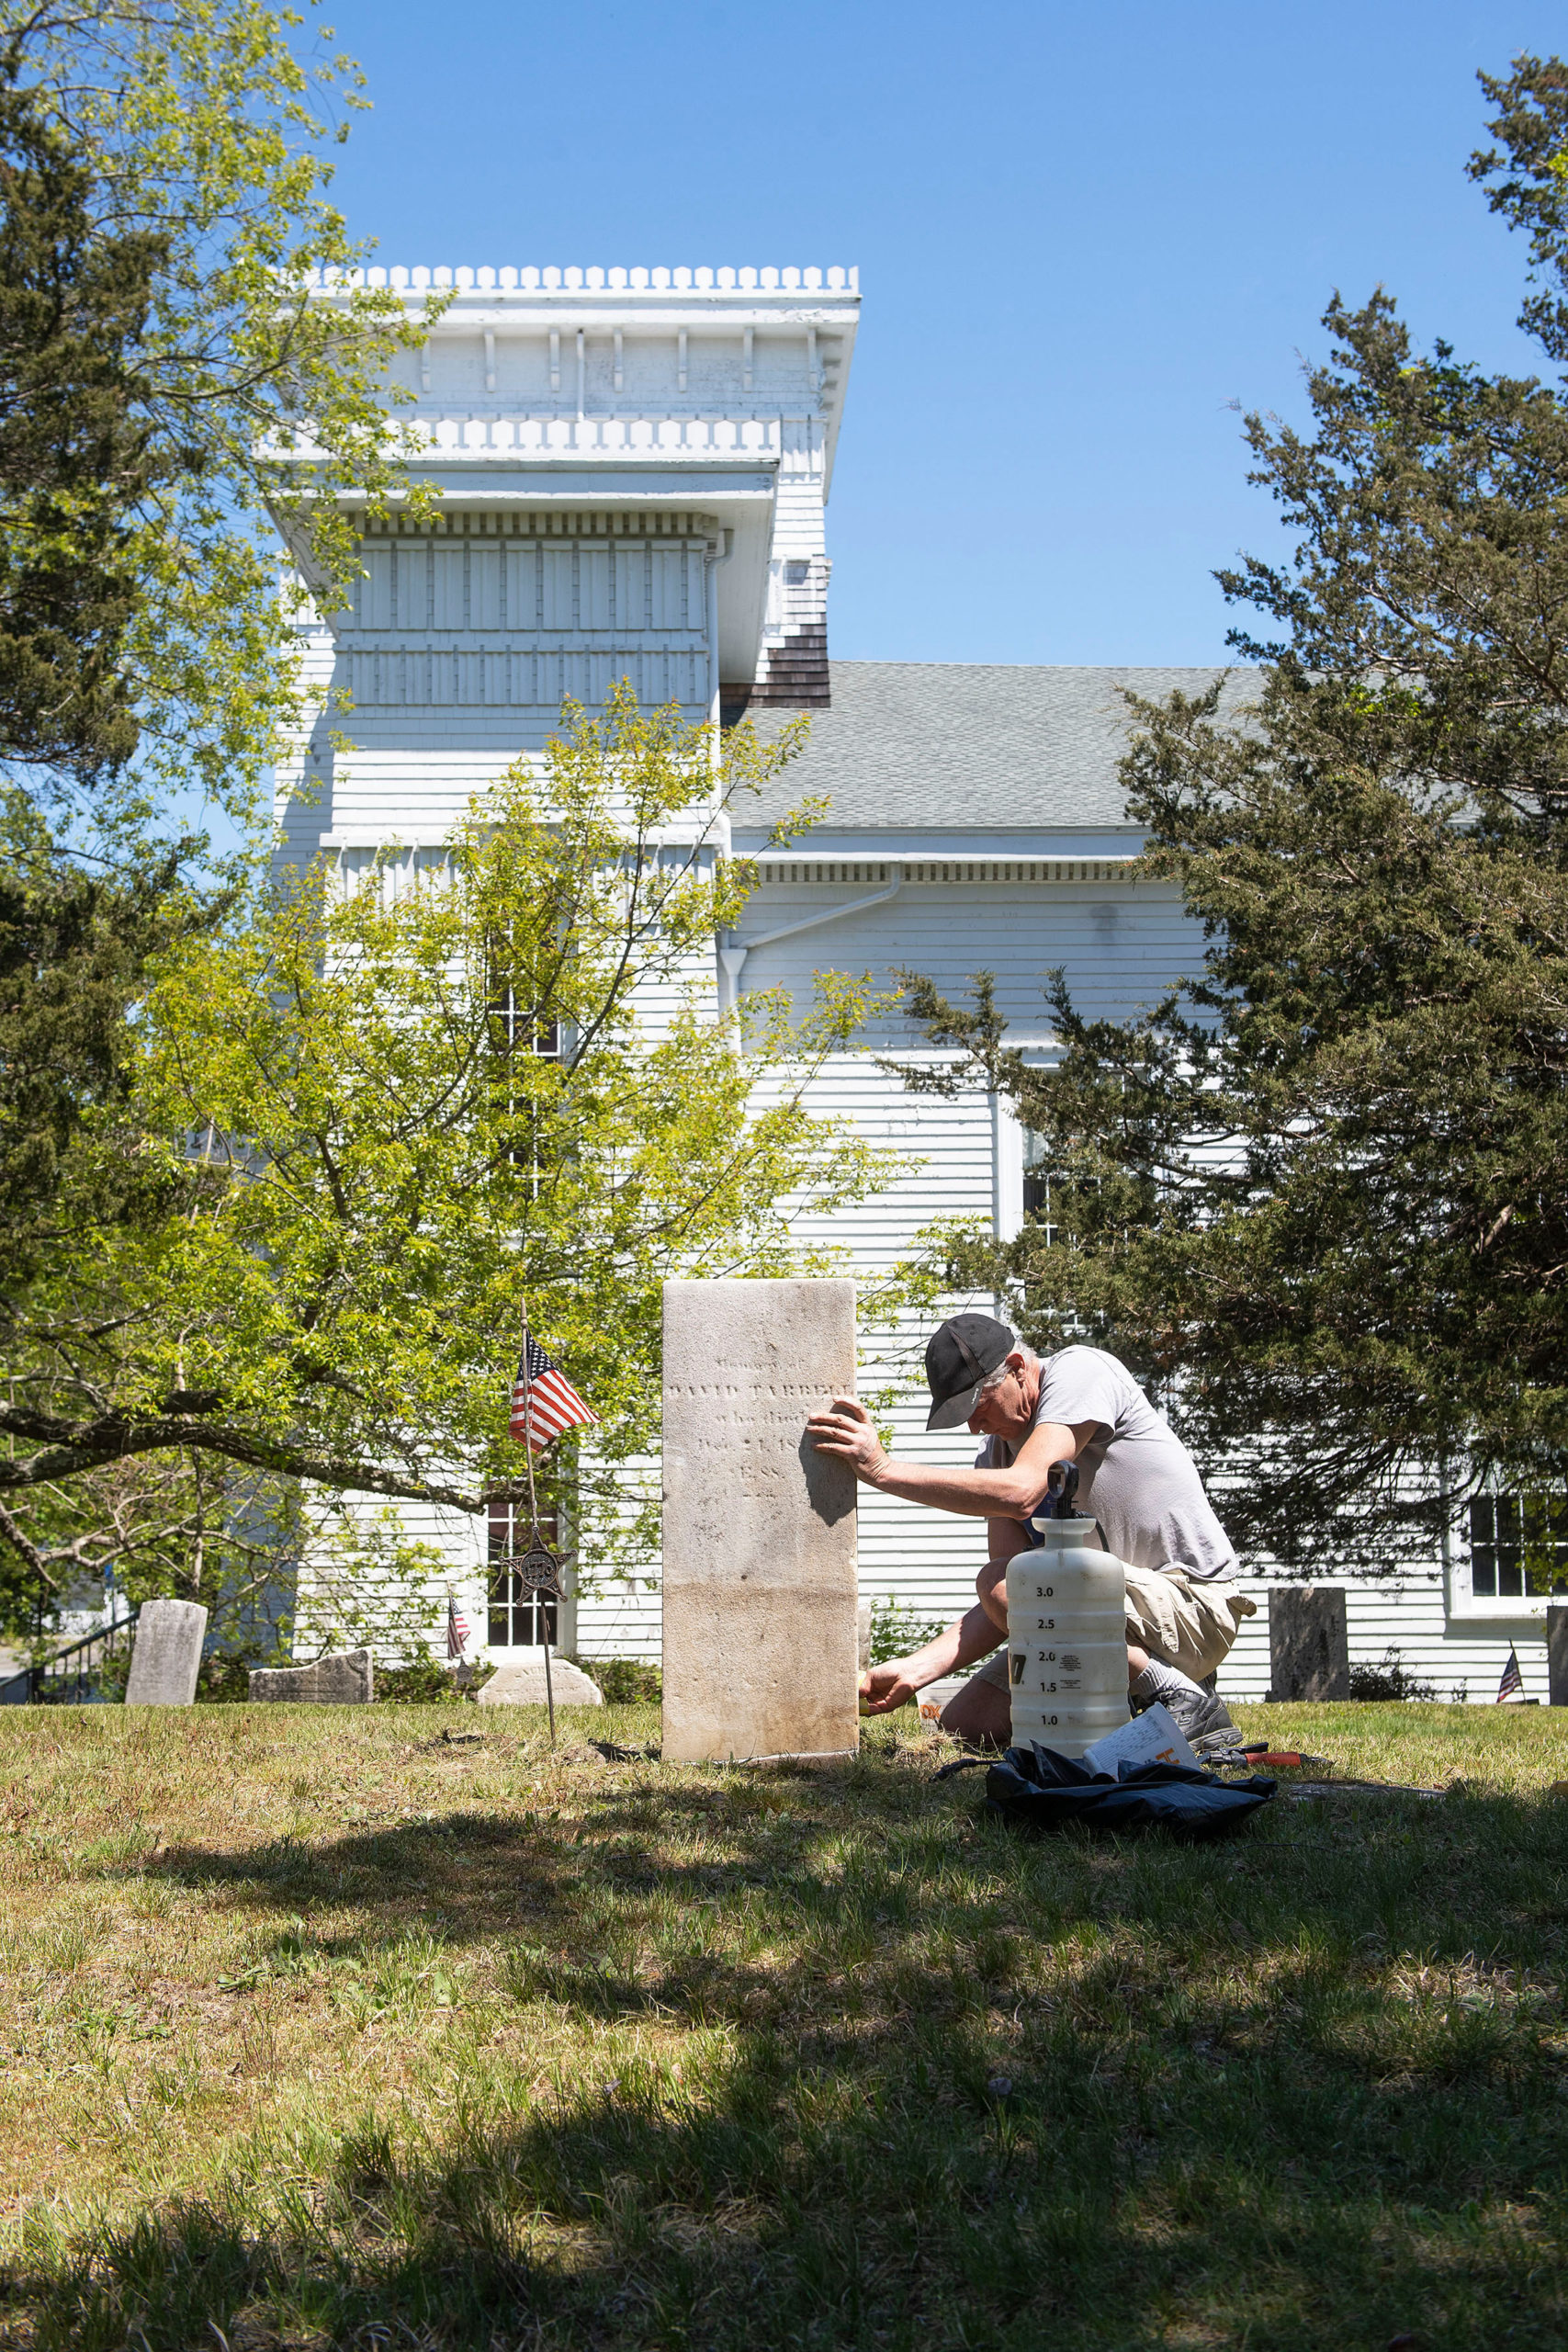 Burying Ground Preservation Group Partner Kurt Kahofer cleans a headstone during the early stages of the renovation and preservation process taking place at the Old Burying Ground adjacent to the Sag Harbor Old Whalers Church on May 11.    MICHAEL HELLER